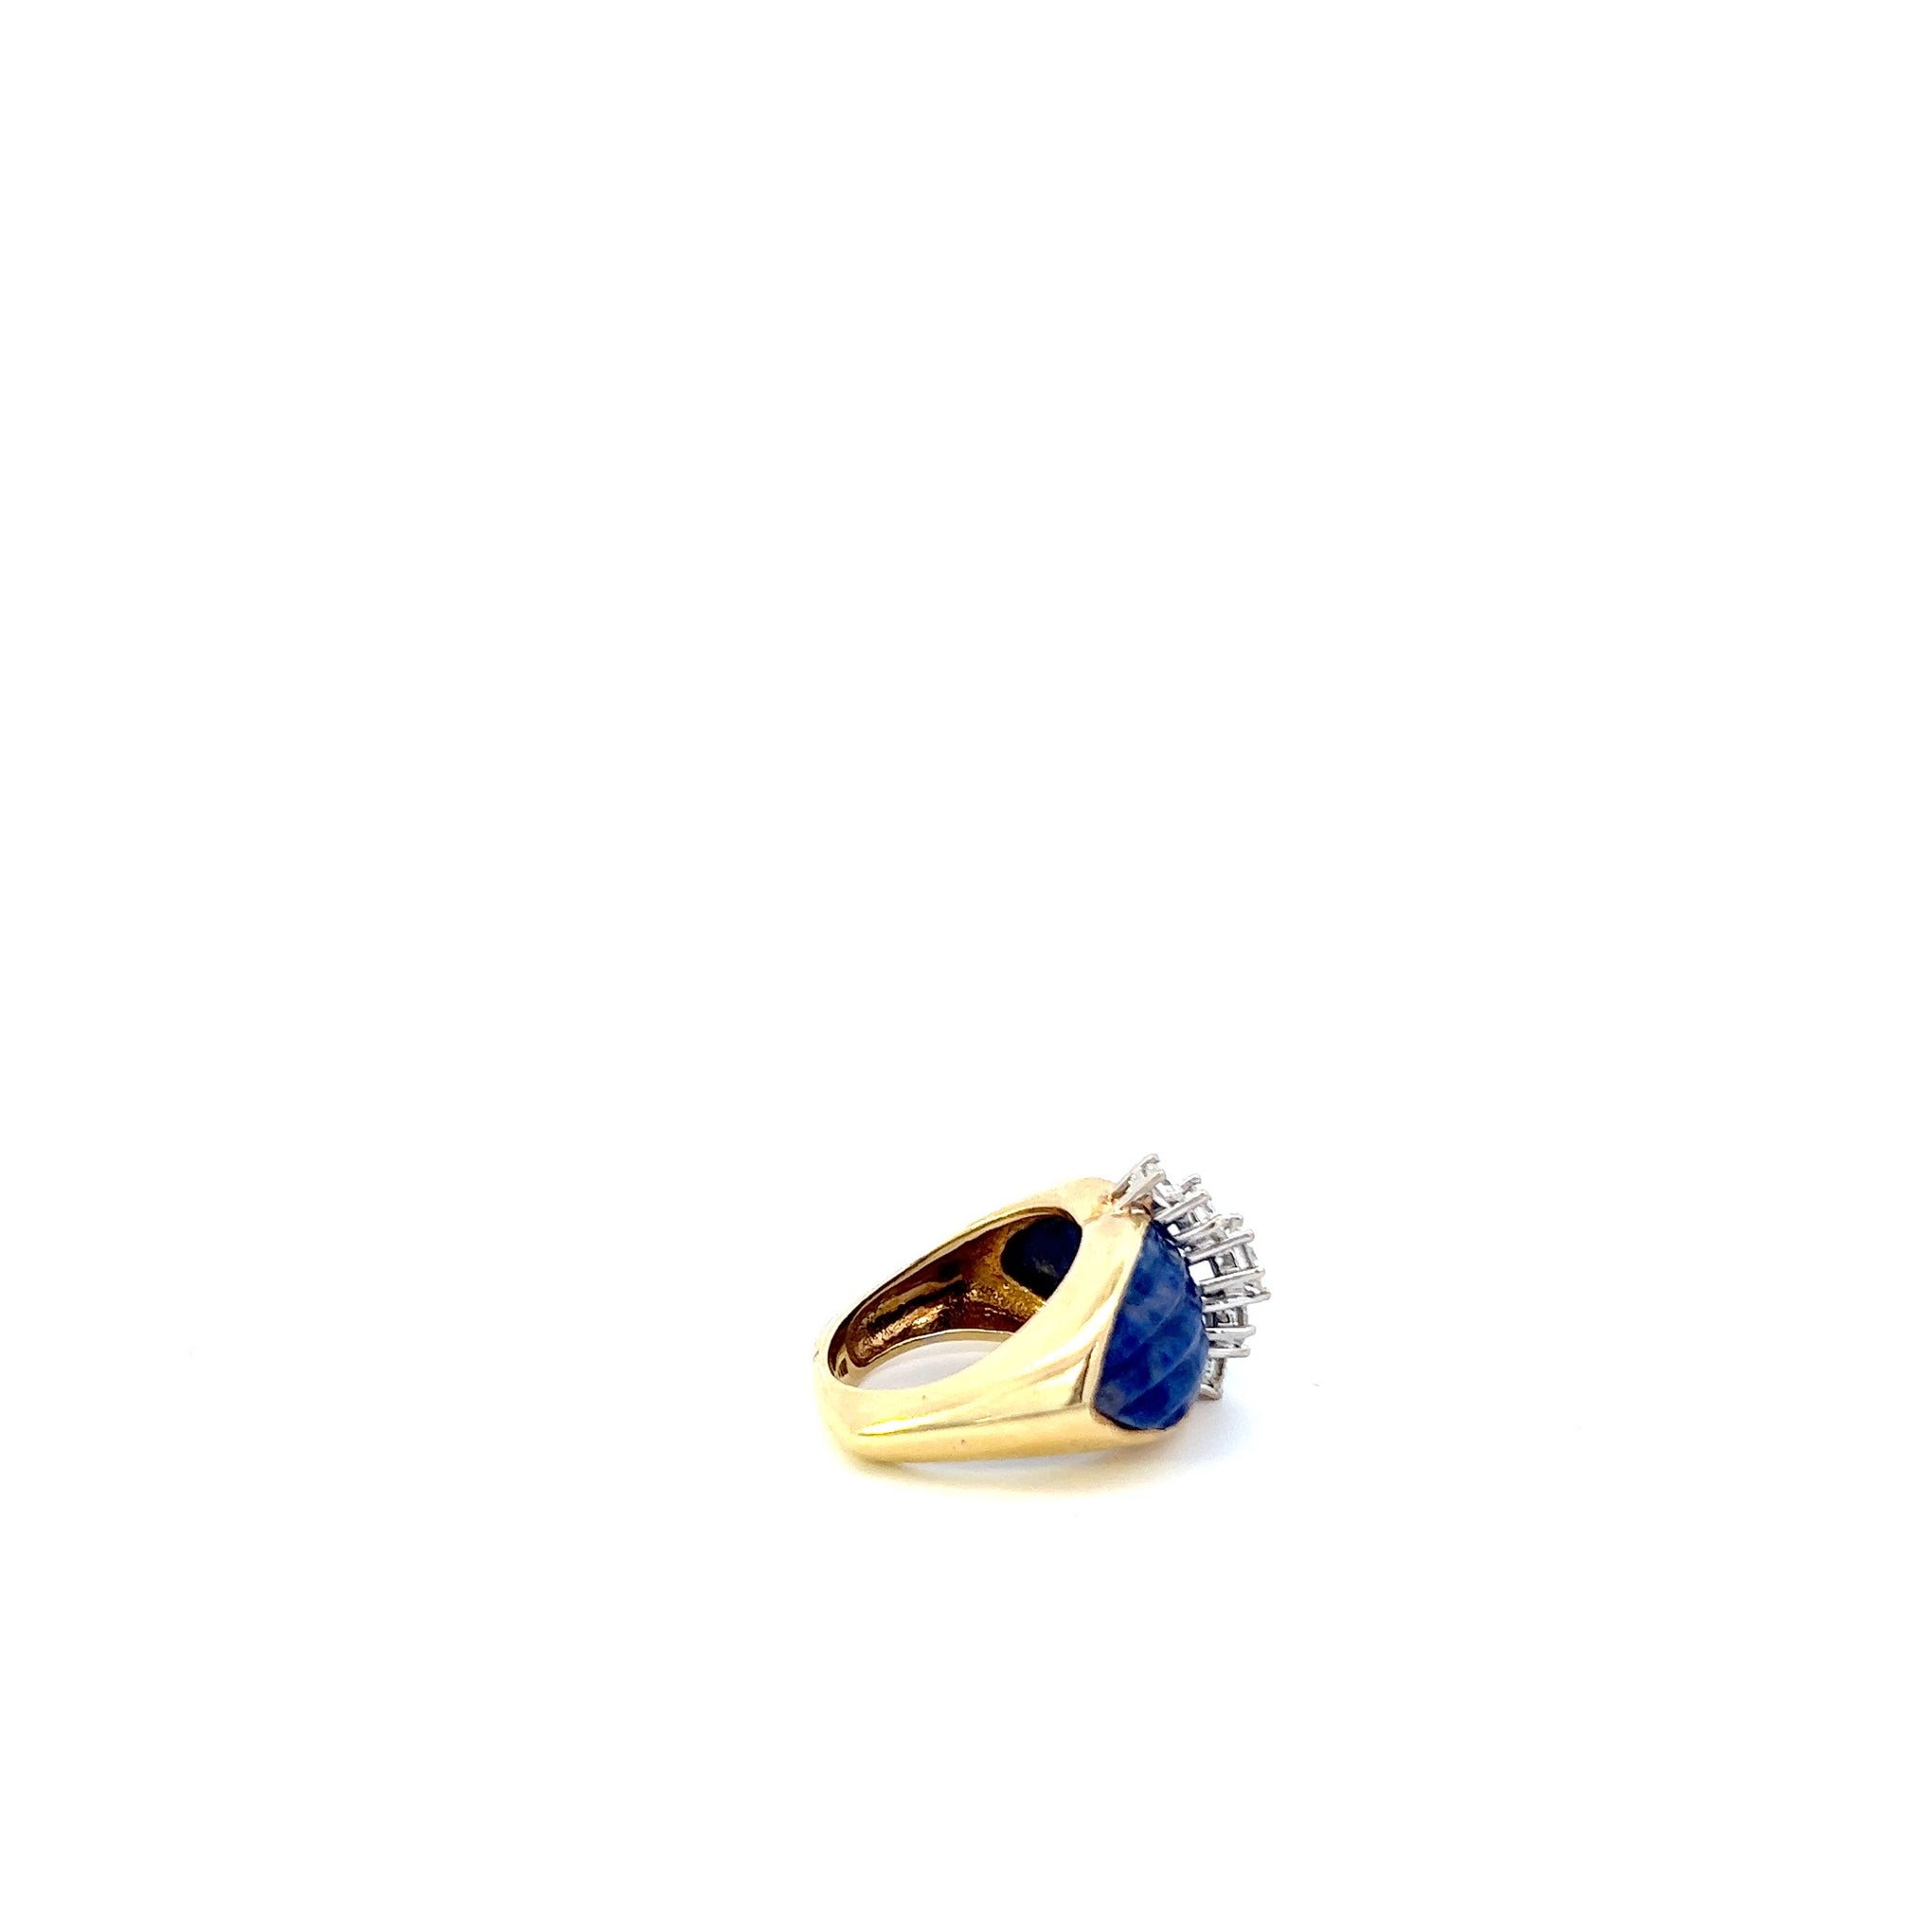 VINTAGE 18KT YELLOW GOLD, ROUND CUT DIAMOND AND LAPIS RING